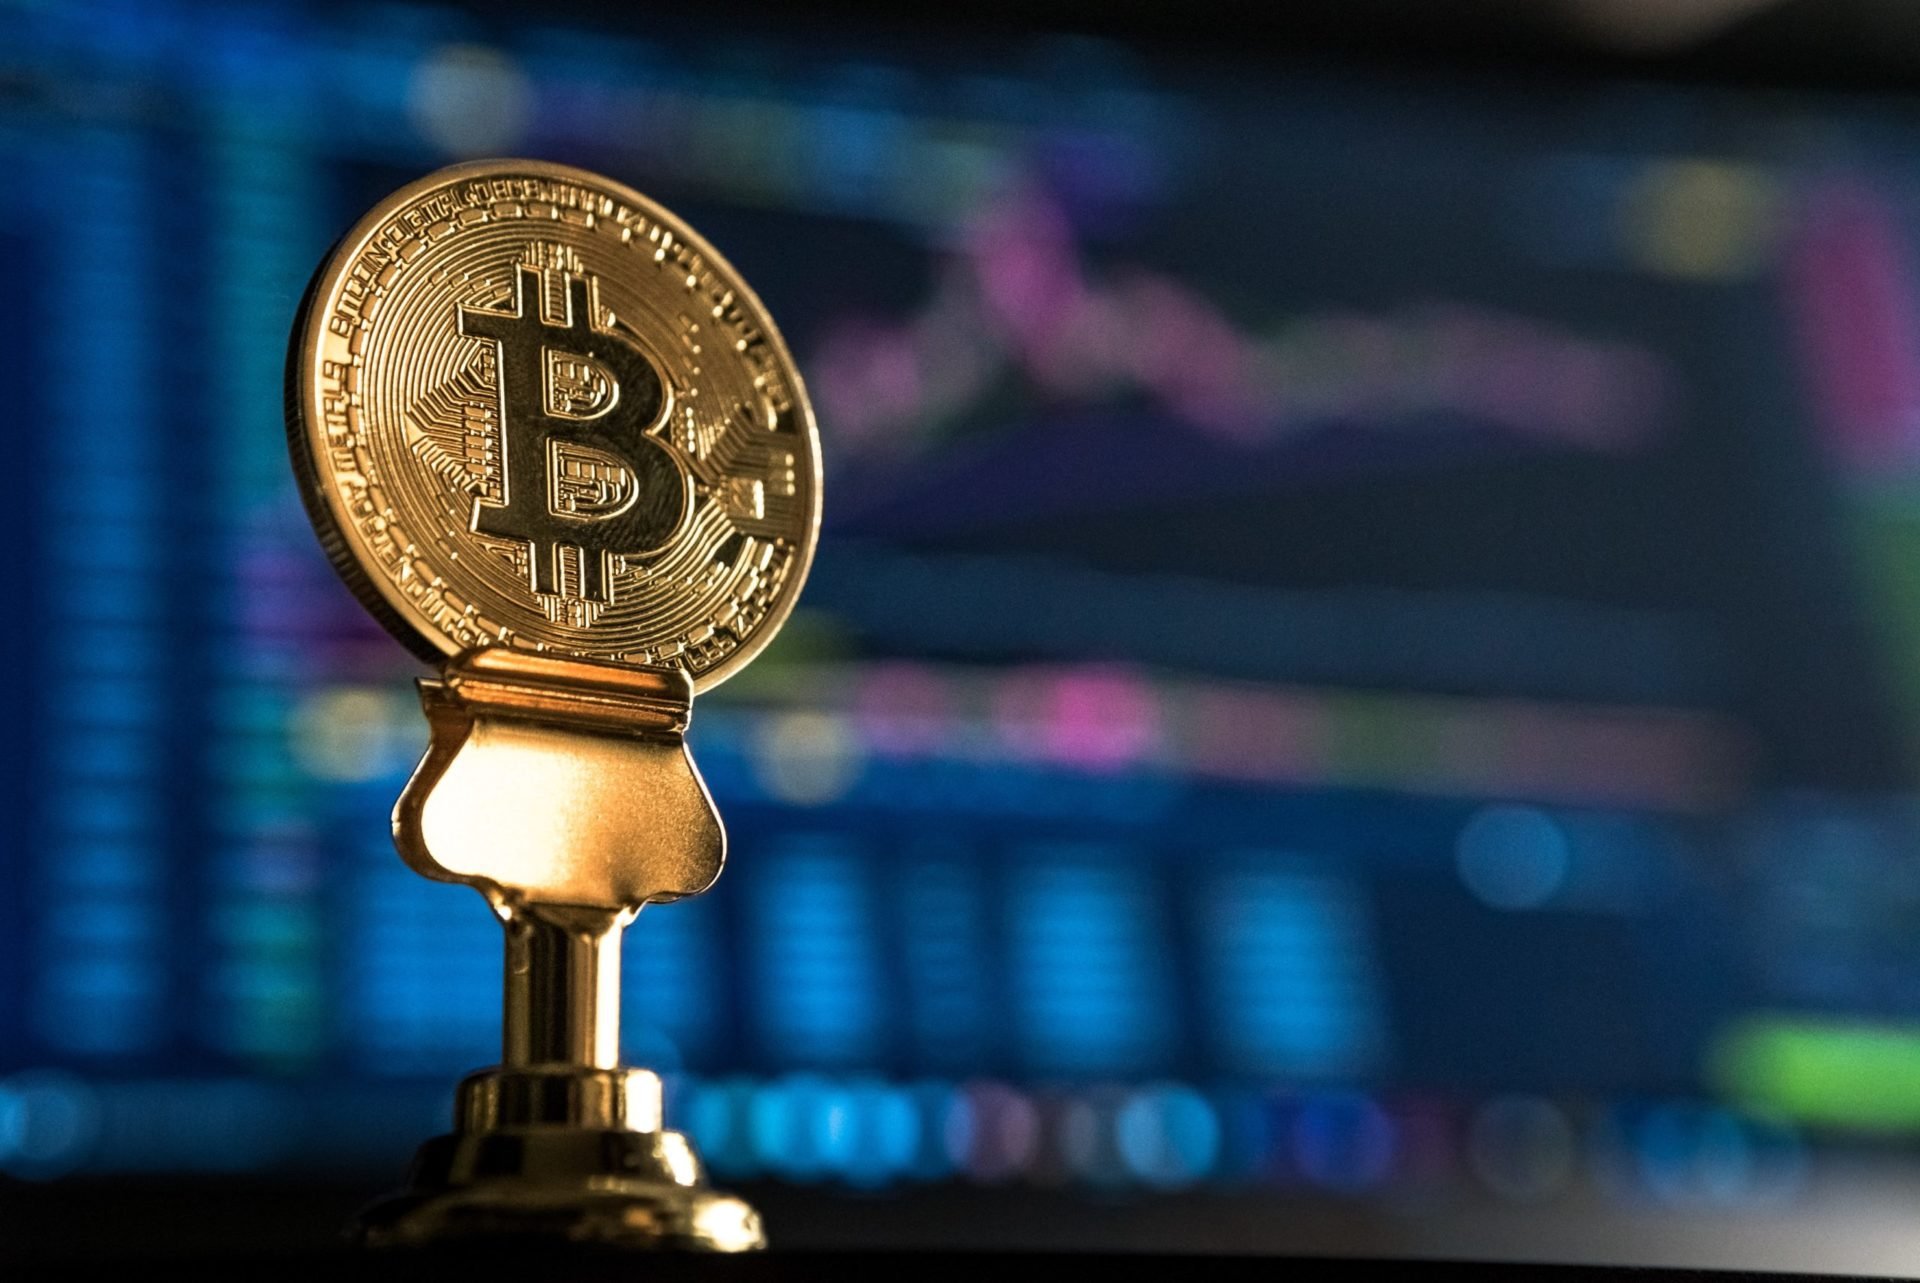 Bitcoin Tanks as Low as $7,700 In Brutal Sell-Off: Is There Hope of Recovery? 10